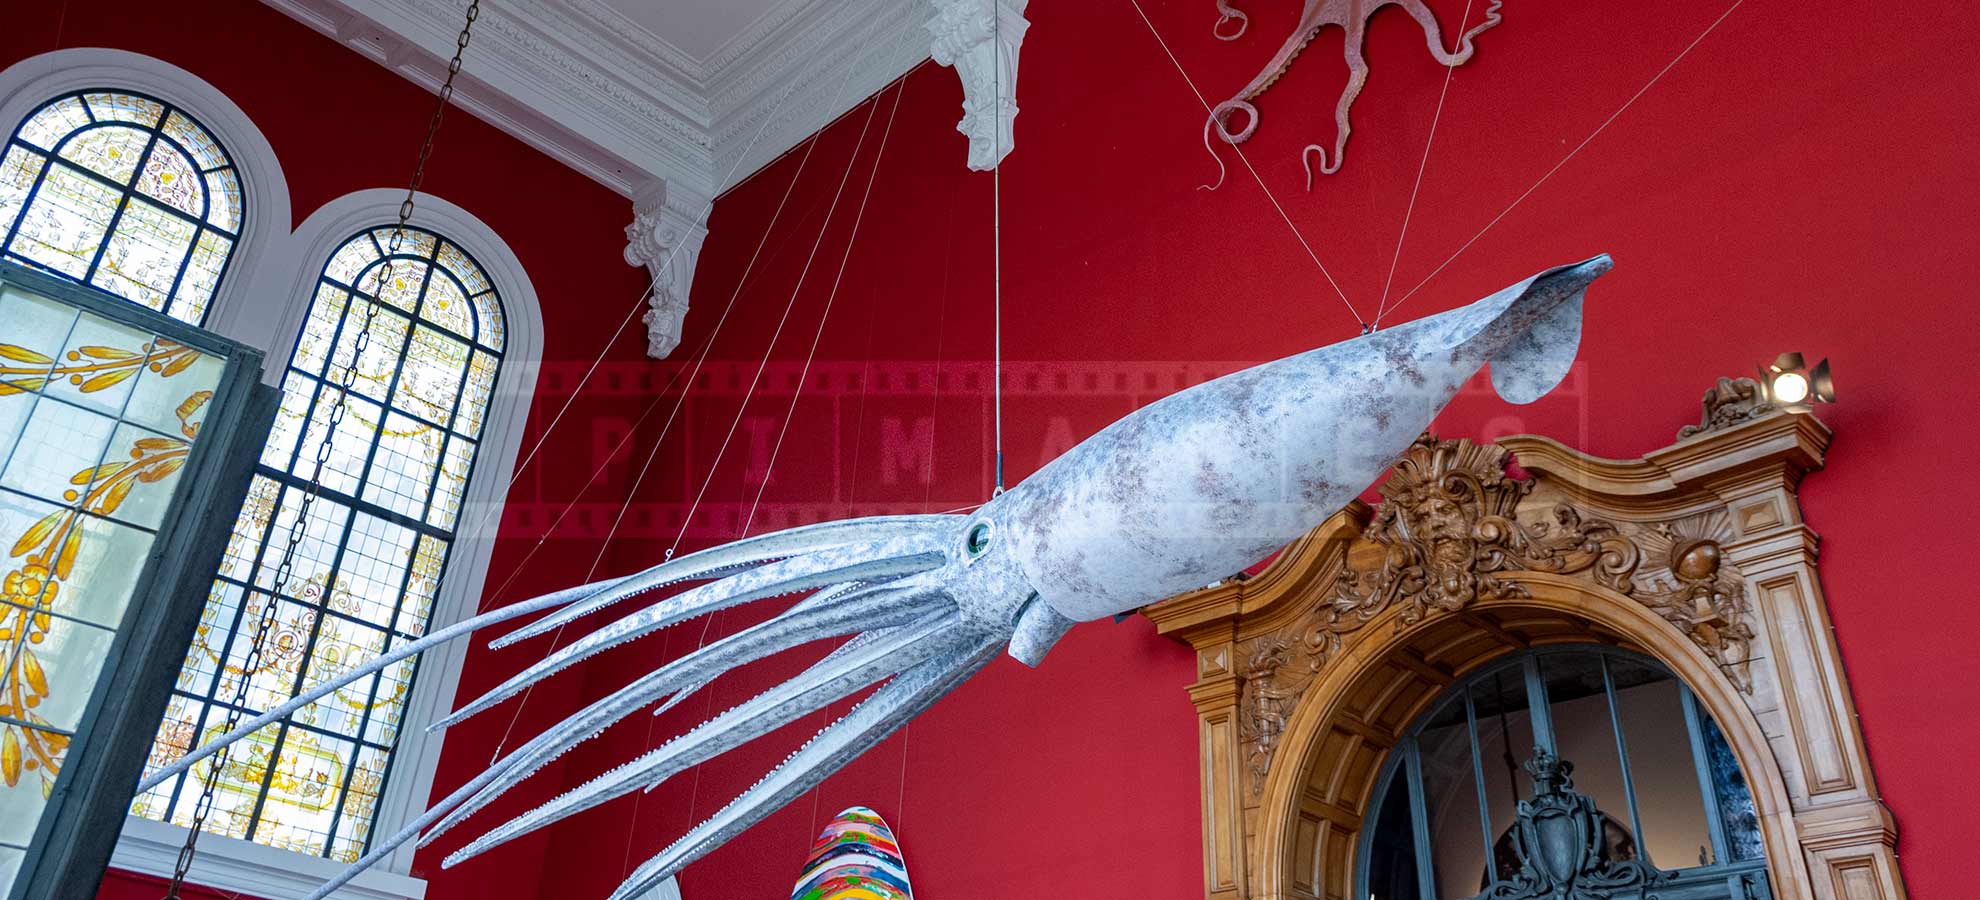 Giant squid model hanging from the ceiling at the museum